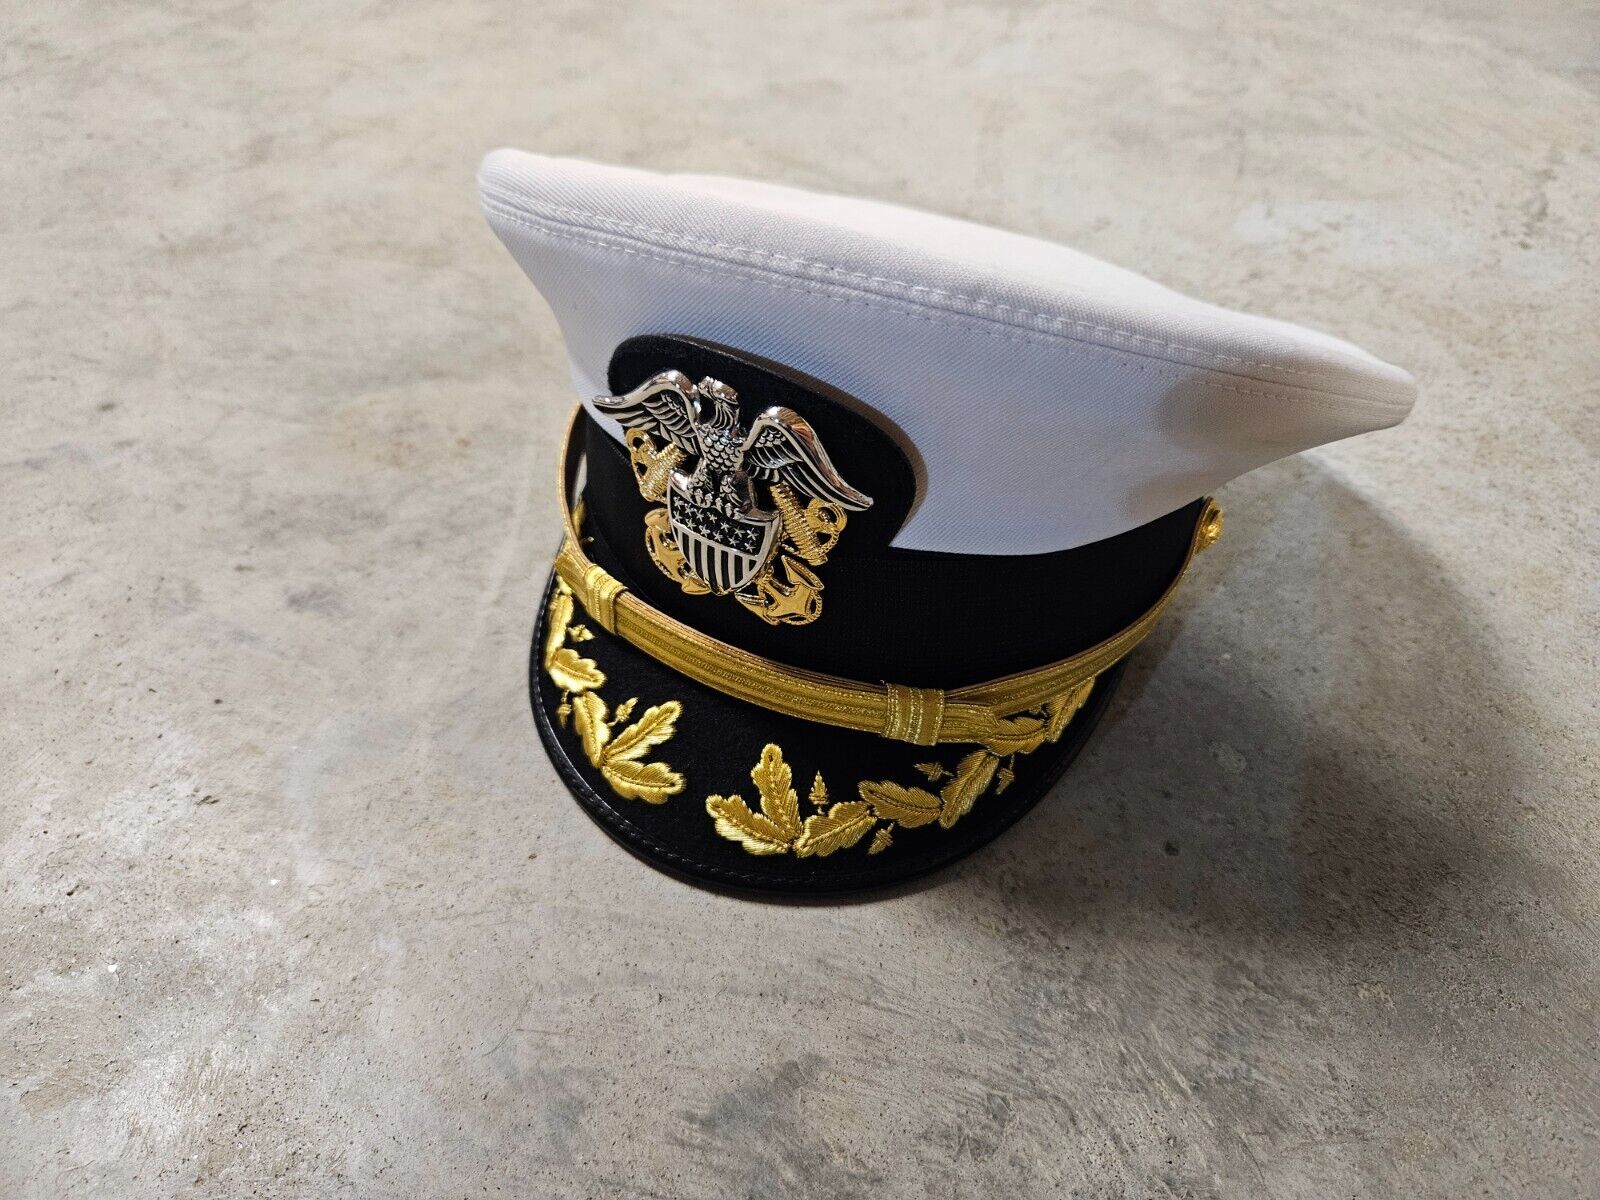 US Navy Officers Dress White Cap With Scrambled Eggs Size 7-1/8